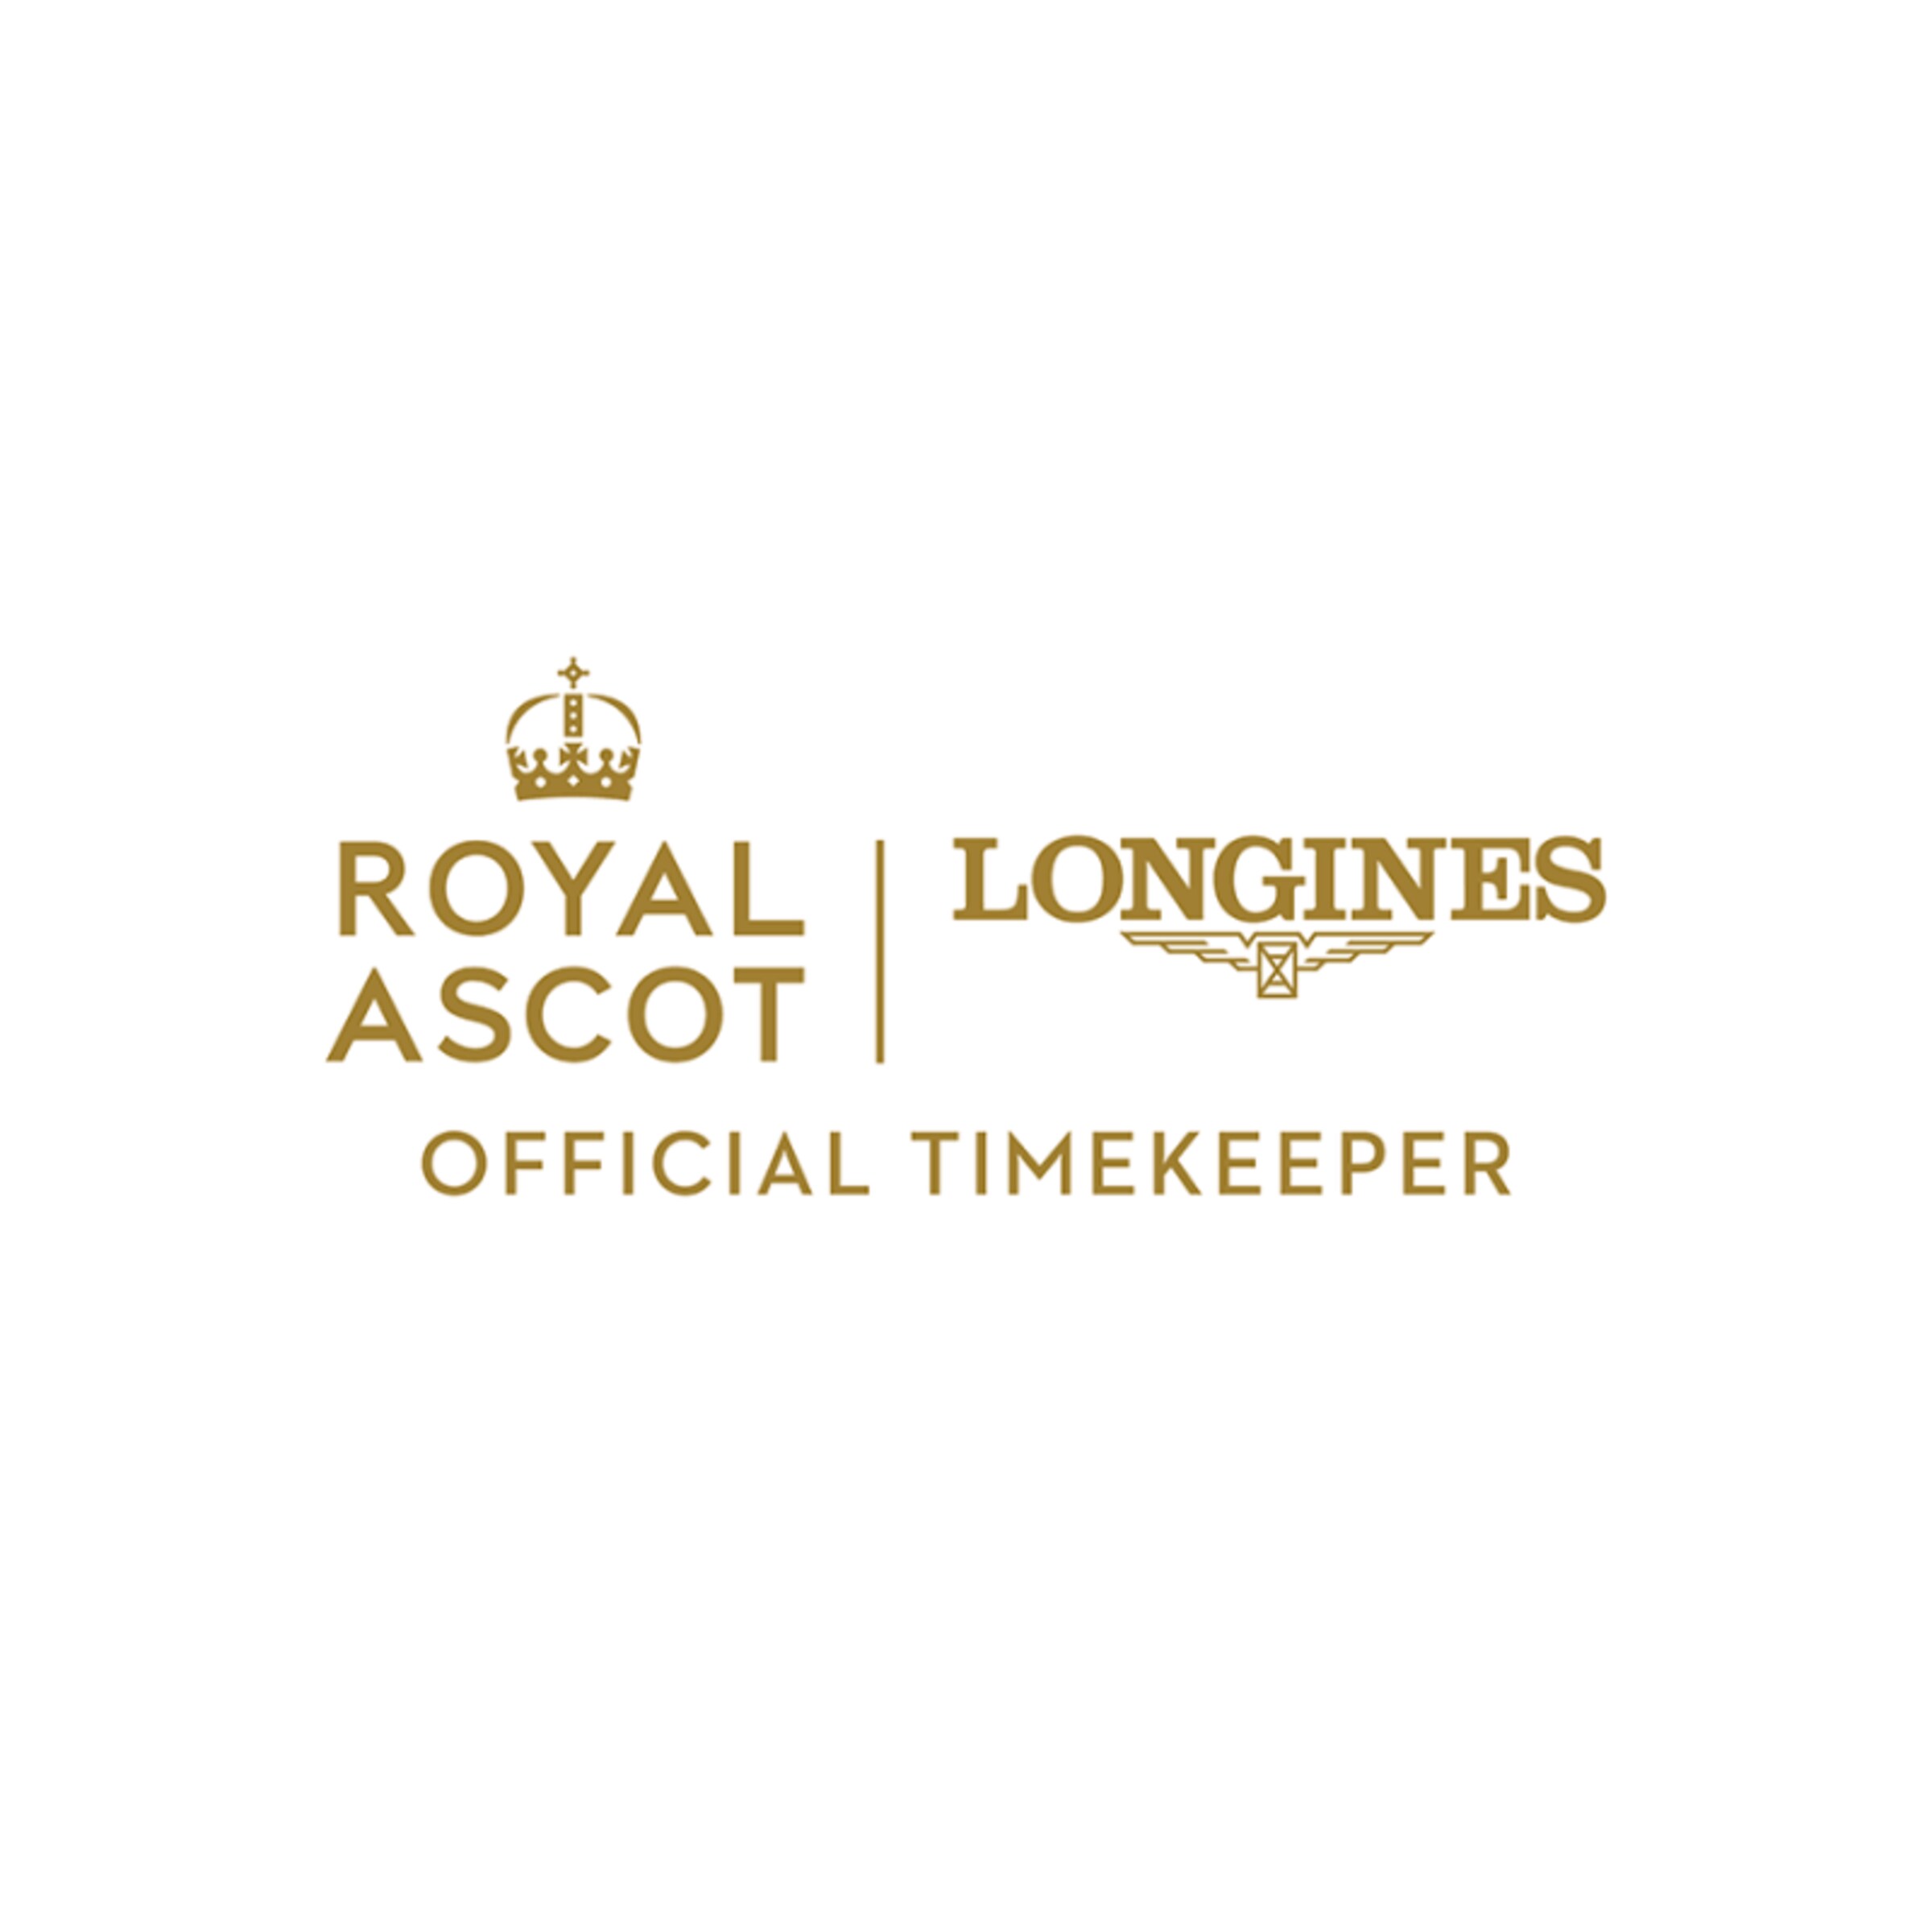 Royal-Ascot-Official-Timekeeper-Gold